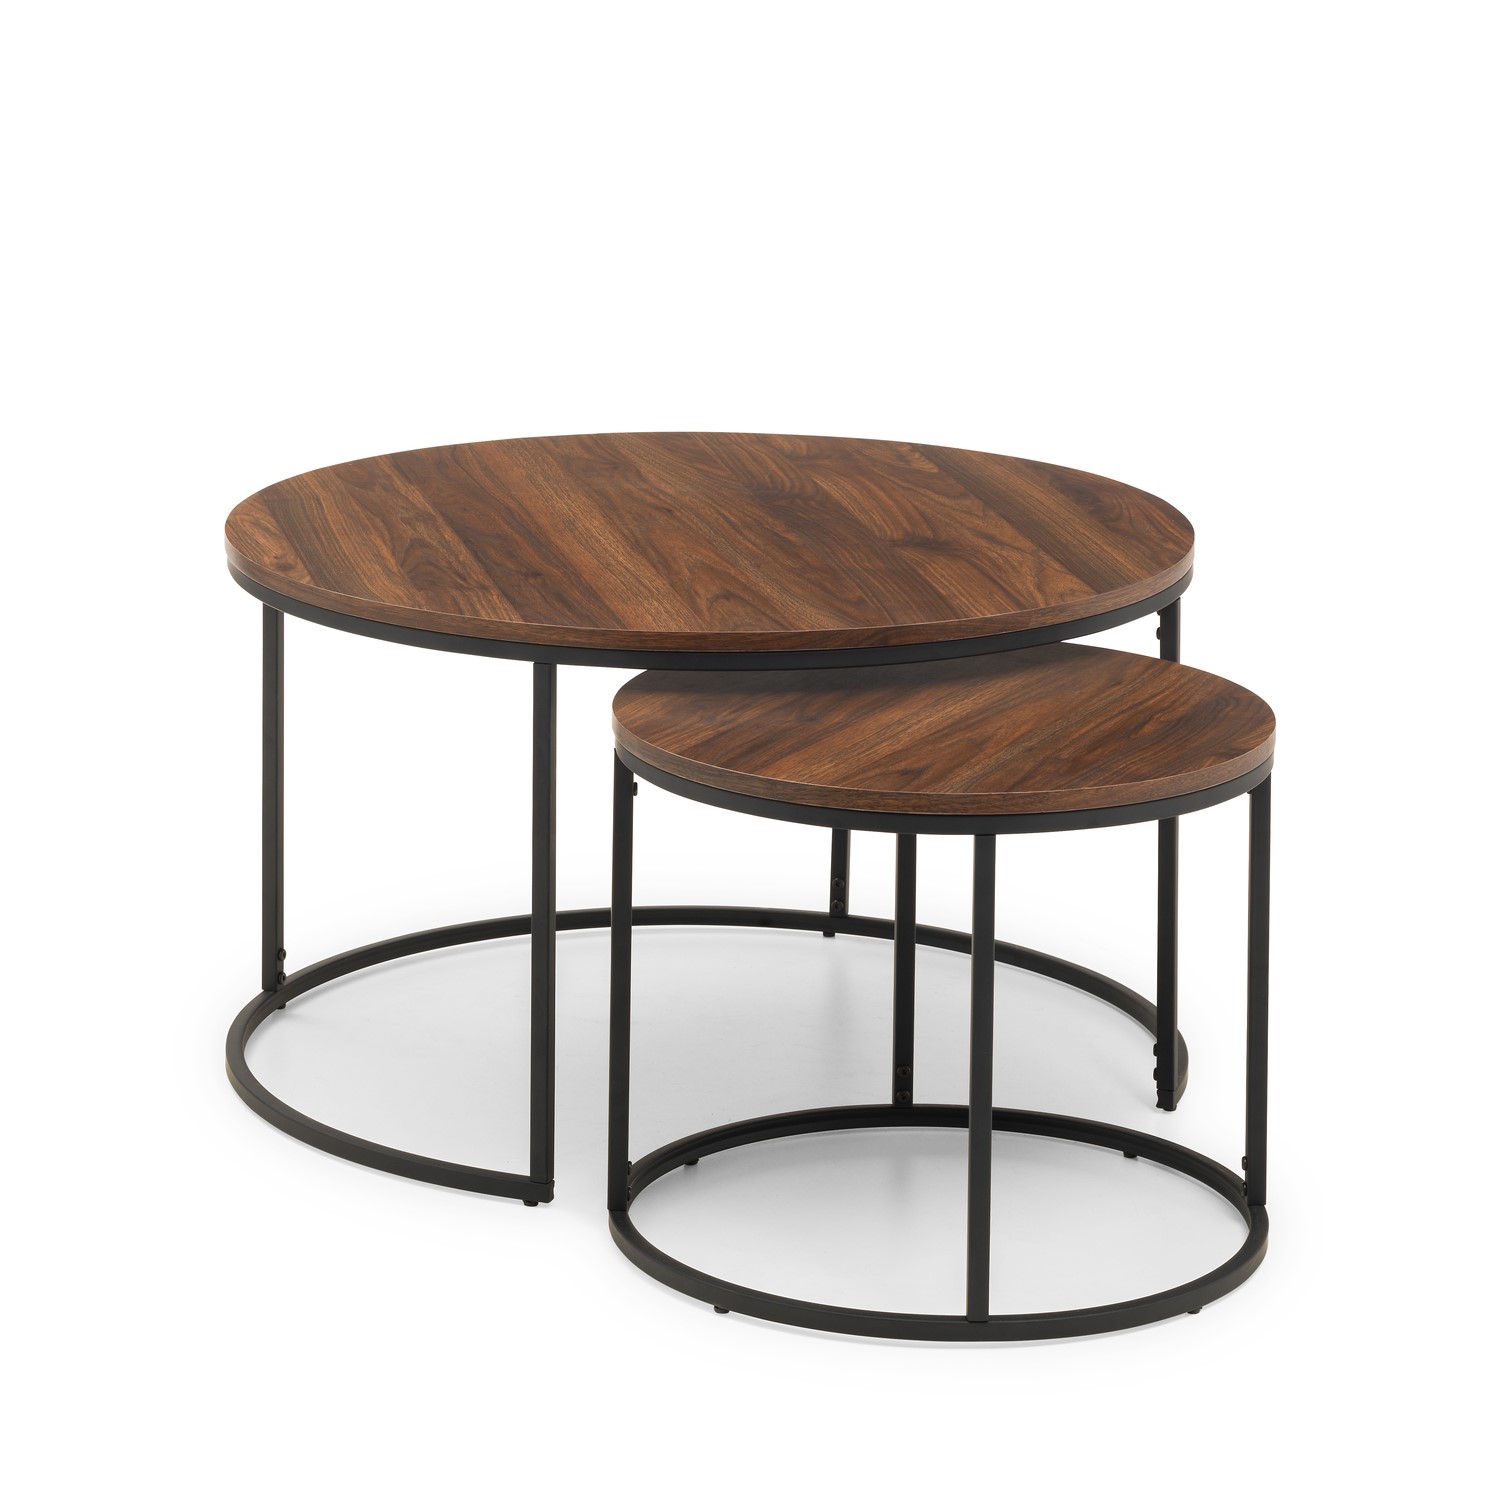 Round Dark Wood Nest Of Coffee Tables, Nesting Coffee Table Round Wood